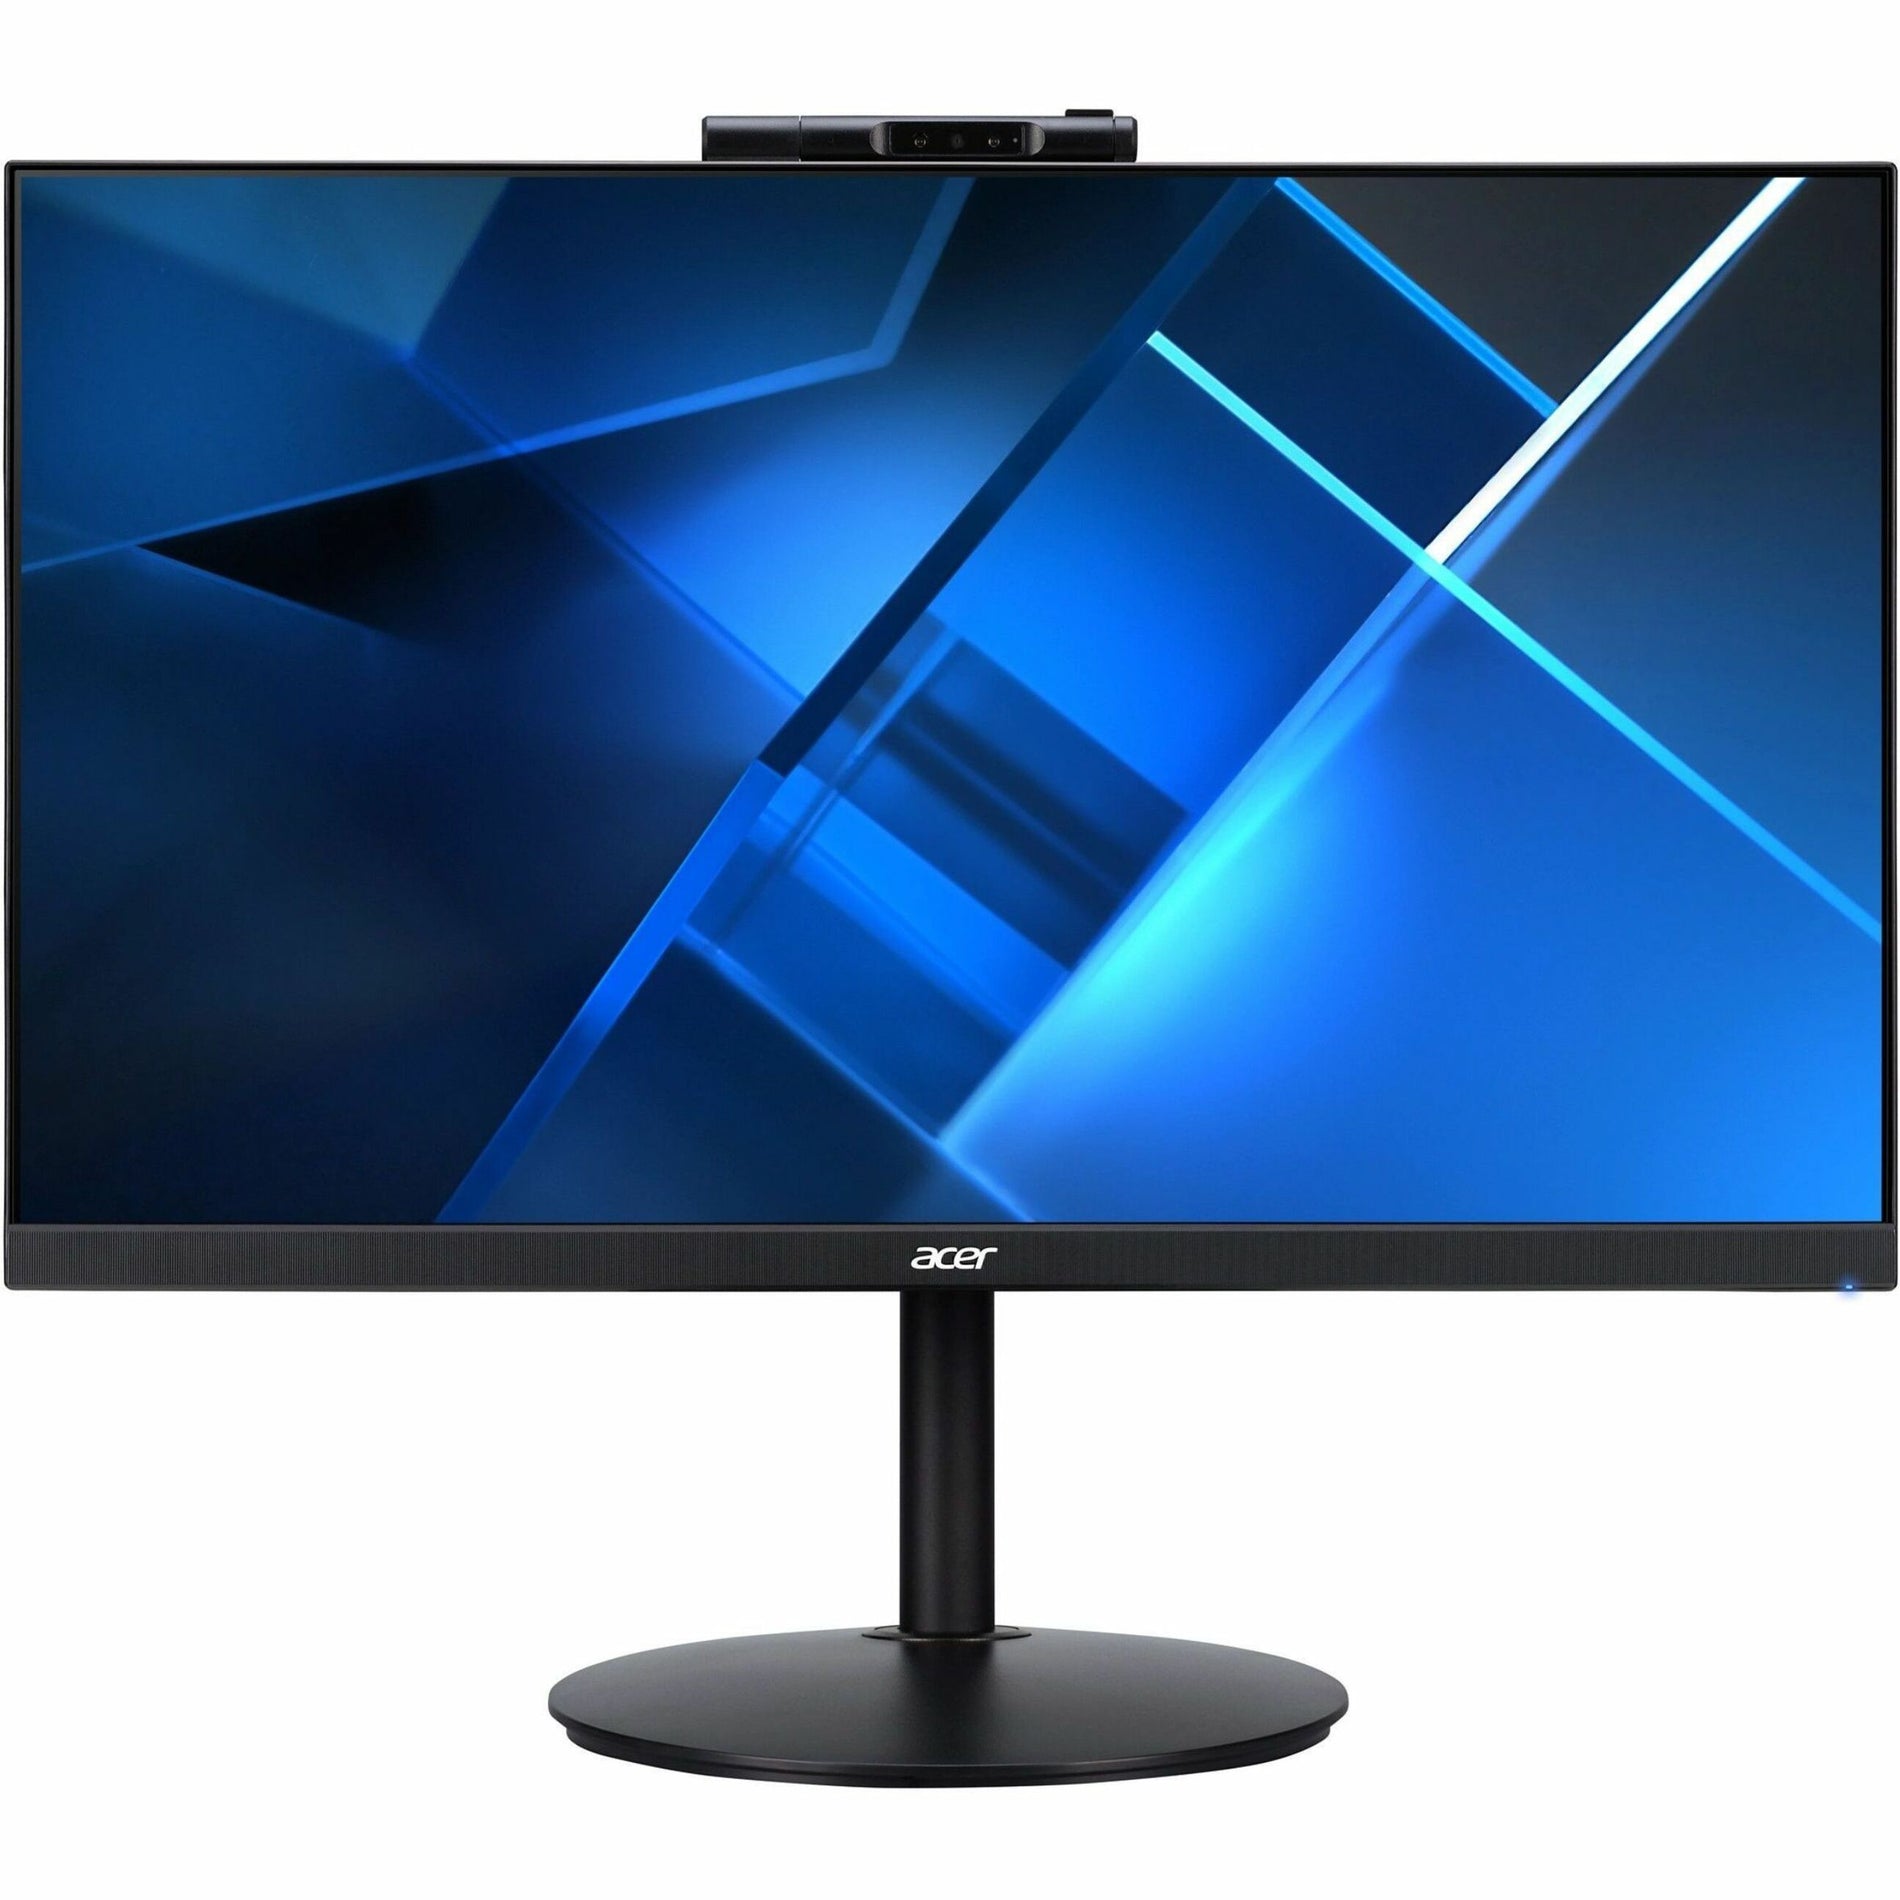 Acer UM.HB2AA.D01 CB272 D Widescreen LCD Monitor, 27" Full HD, 1ms Response Time, FreeSync, Built-in Speakers